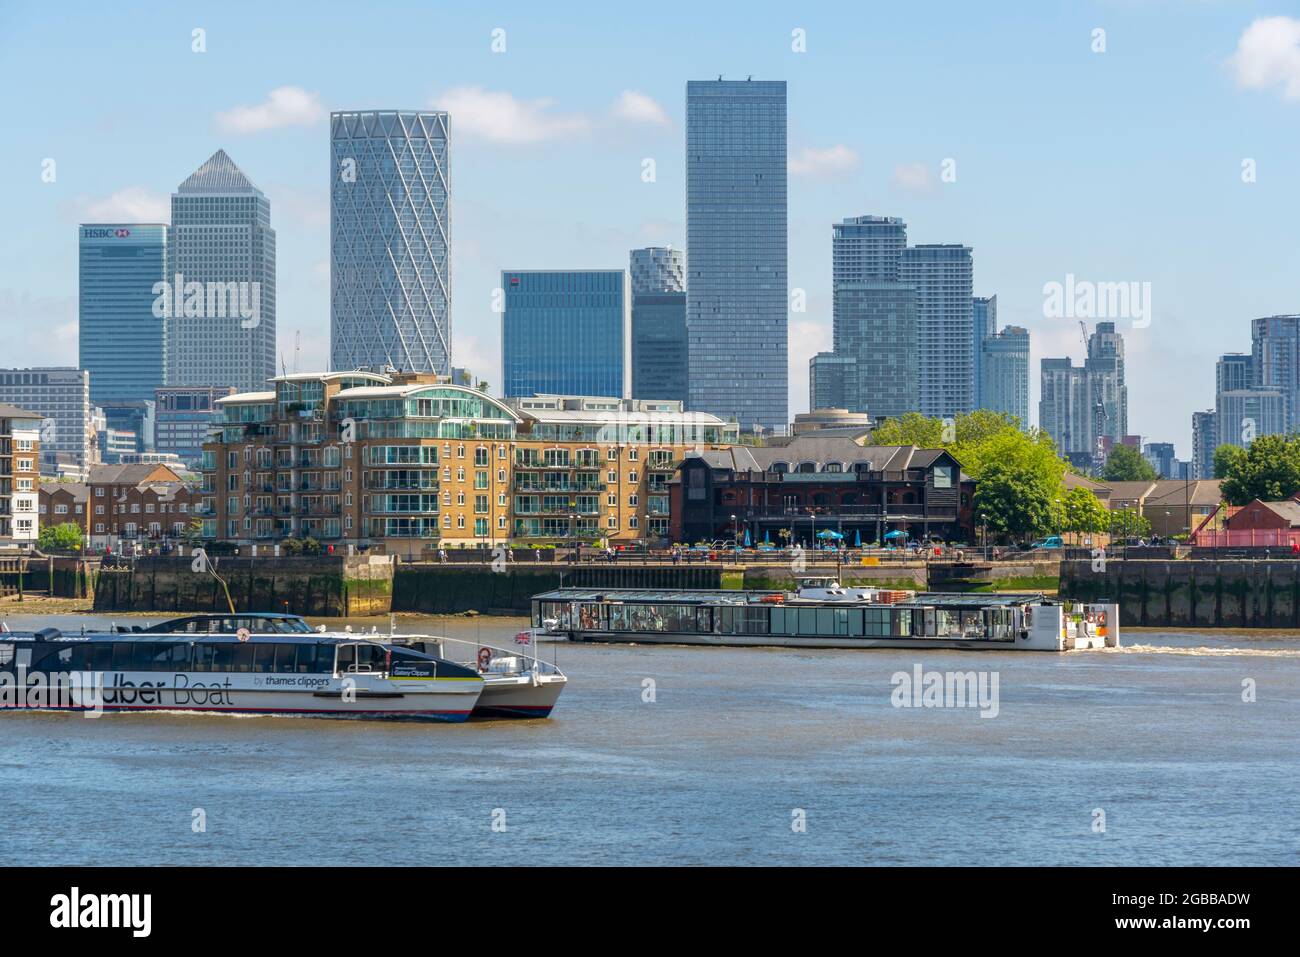 View of Canary Wharf Financial District and taxi boat from the Thames Path, London, England, United Kingdom, Europe Stock Photo